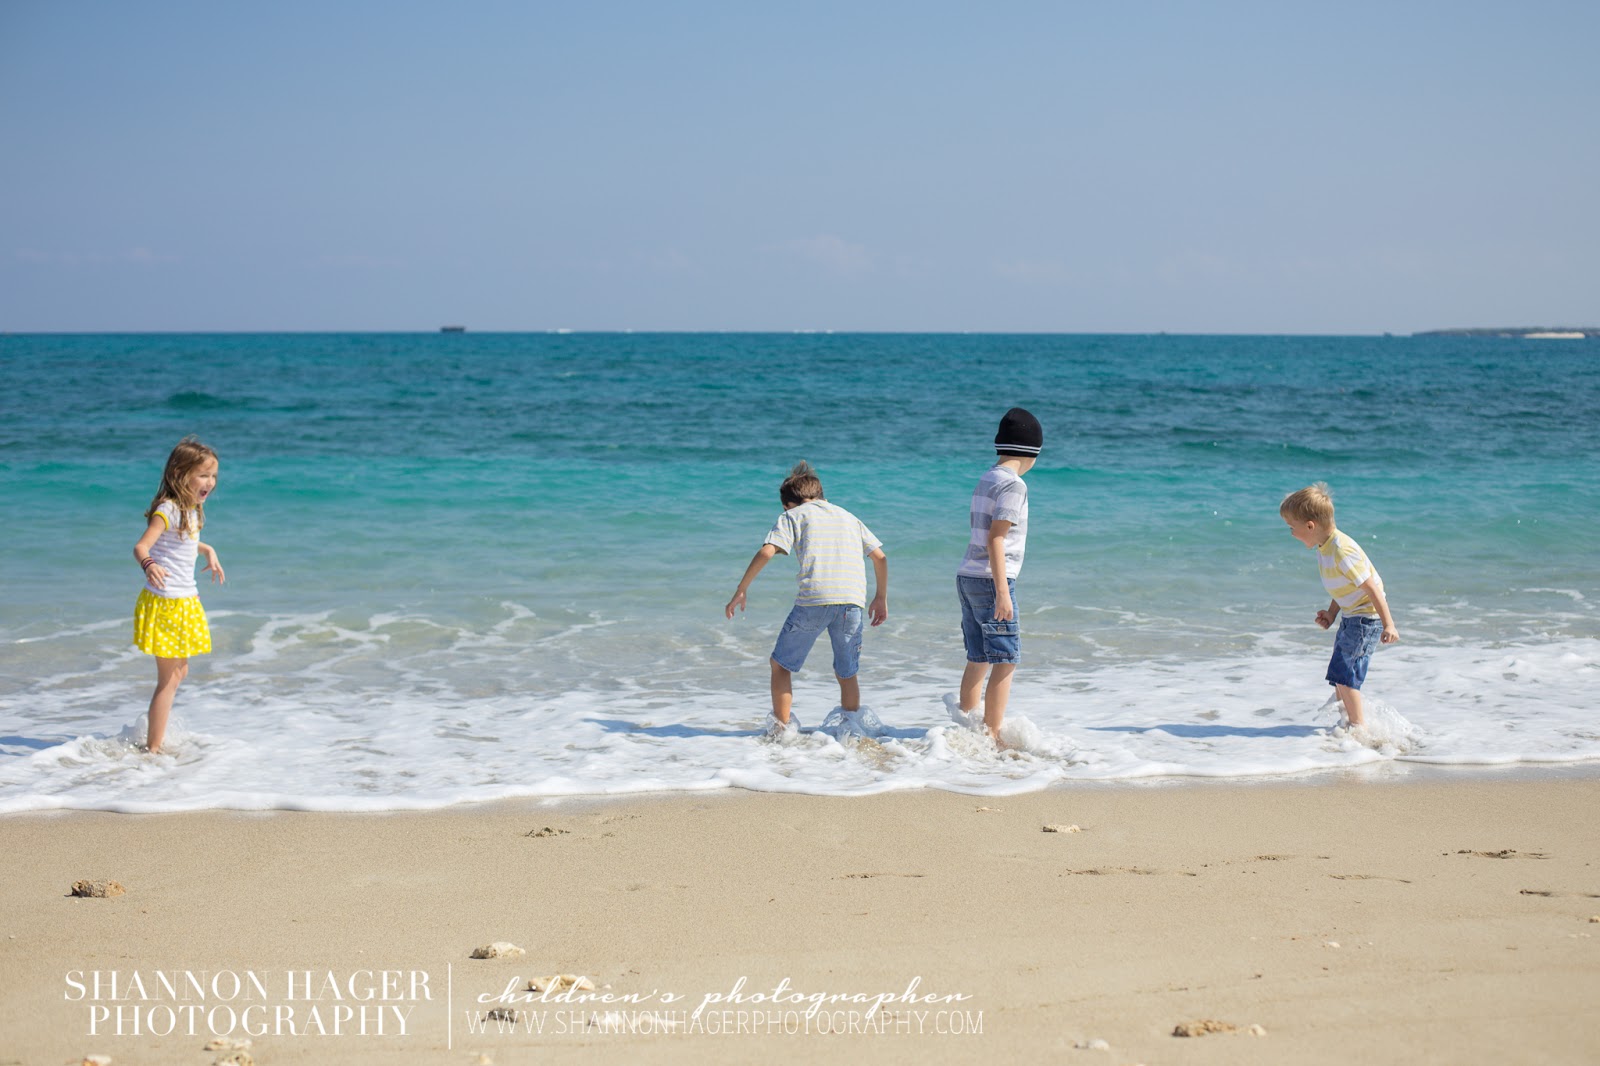 Children's Photography by Shannon Hager Photography, beach